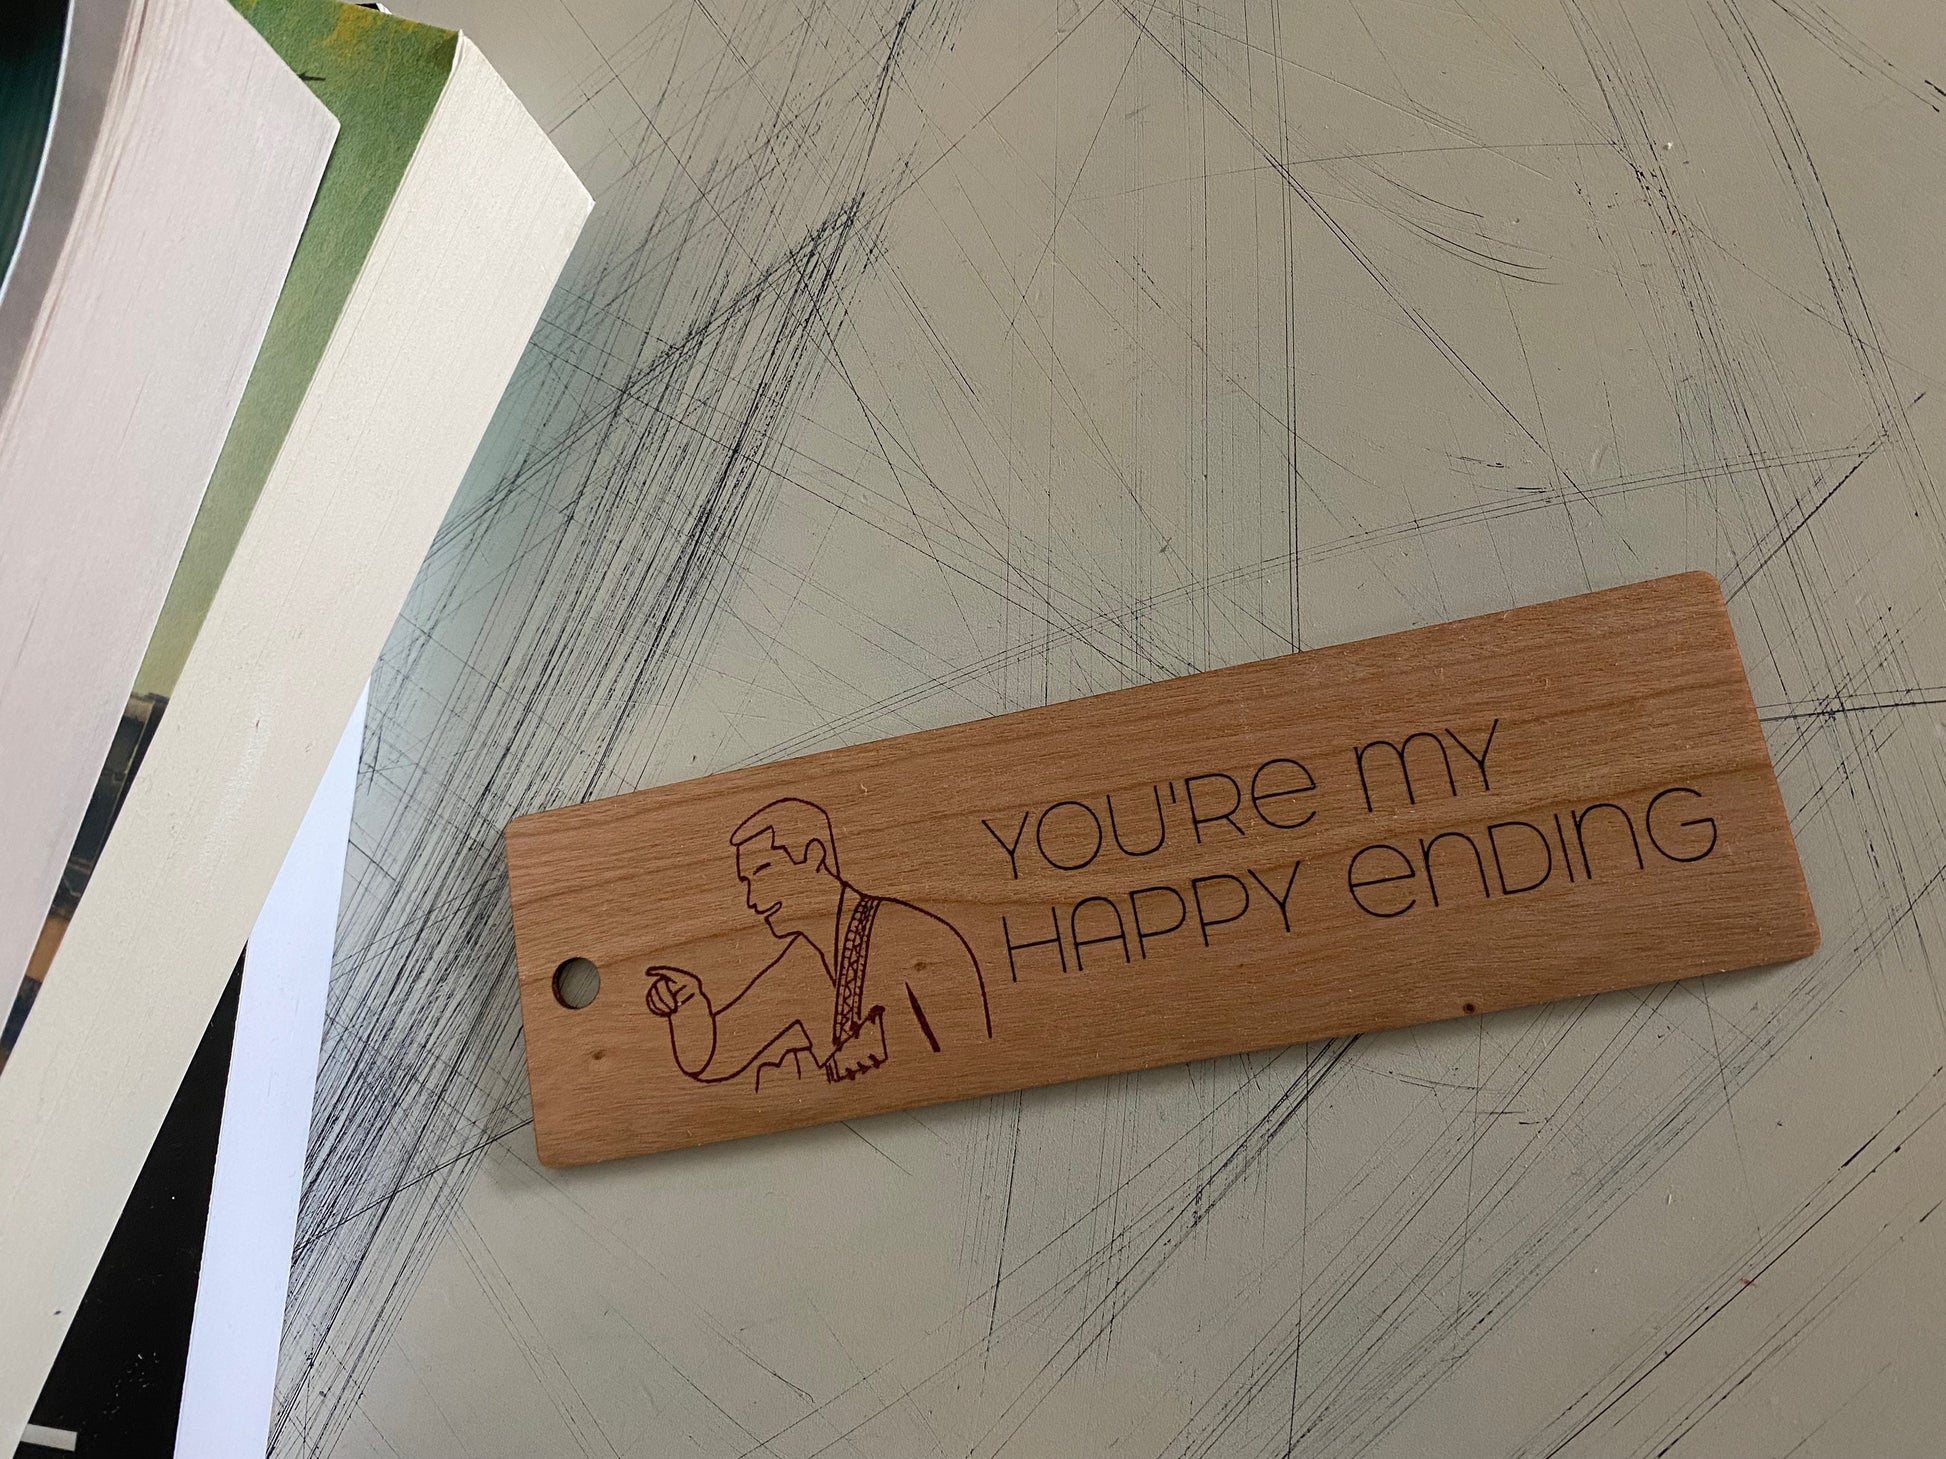 You're my happy ending - David and Patrick - engraved wood bookmark